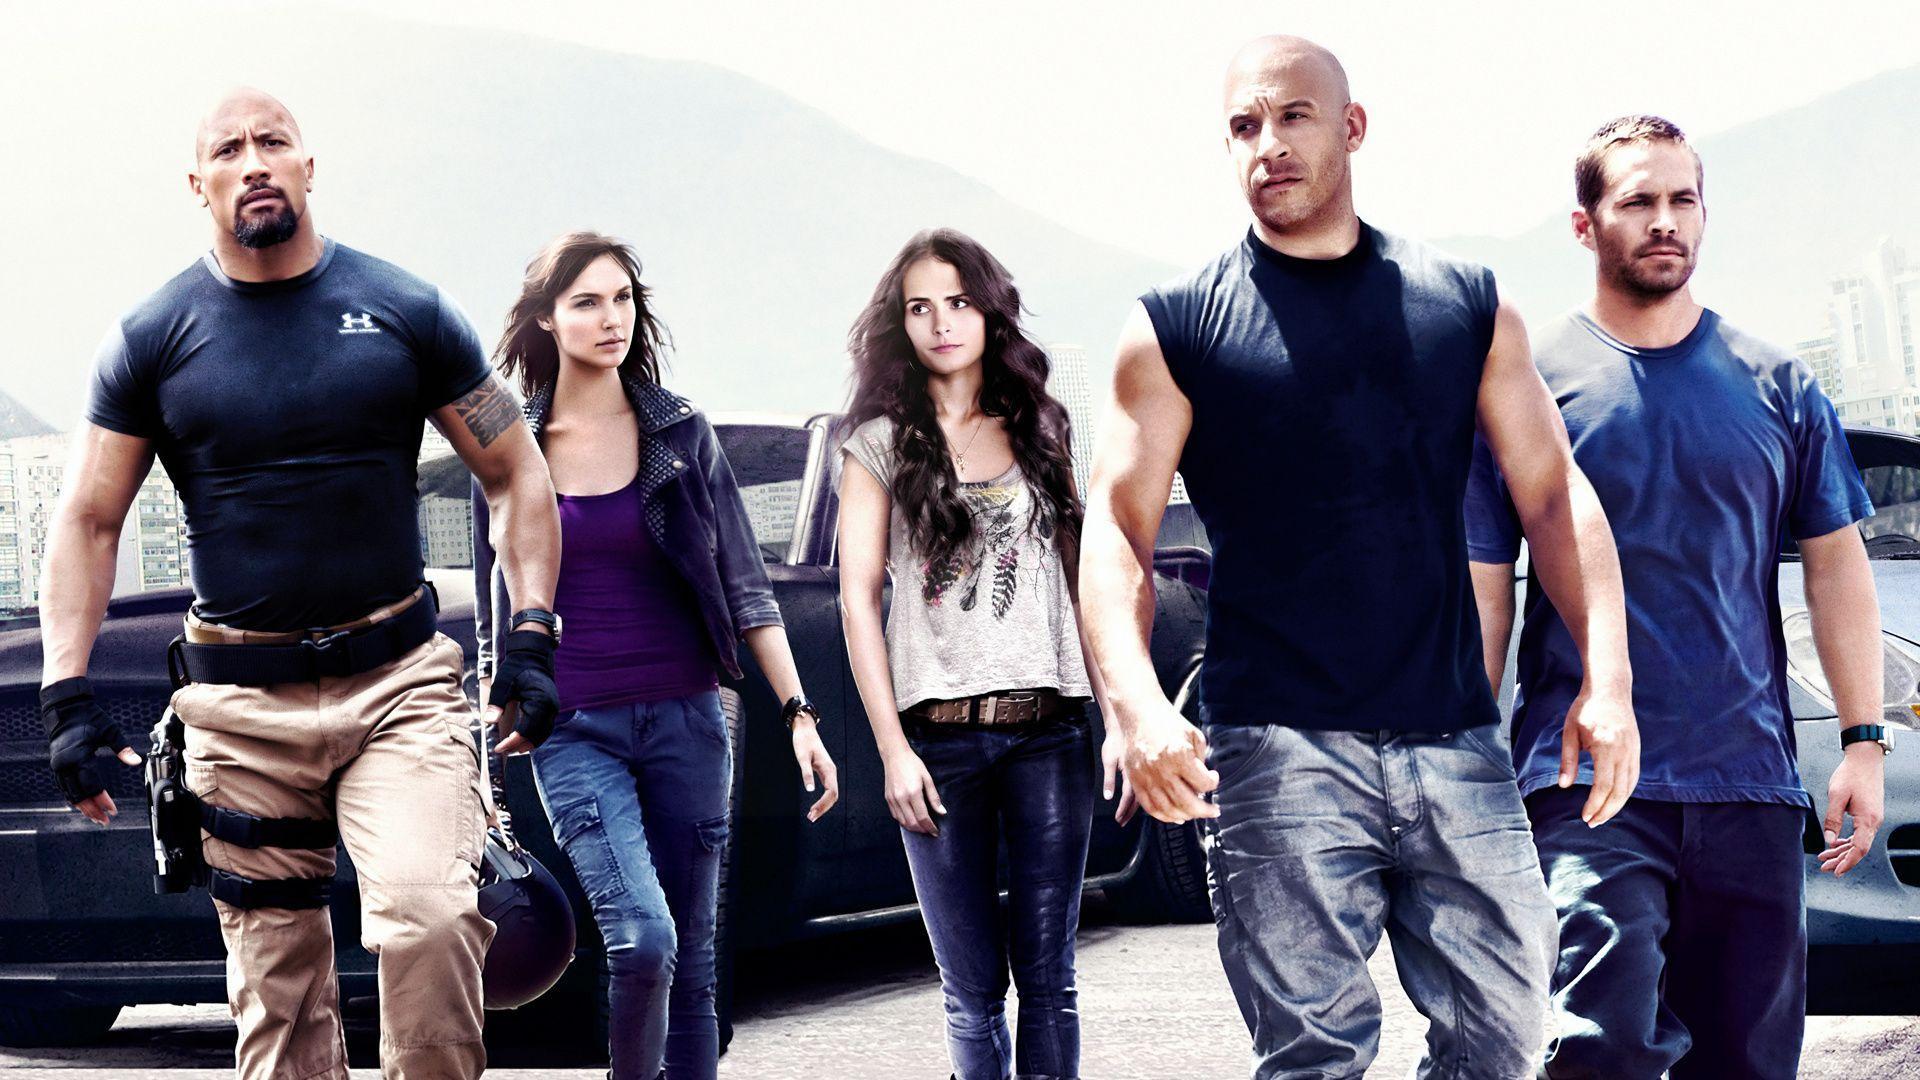 Images: Fast and Furious 8